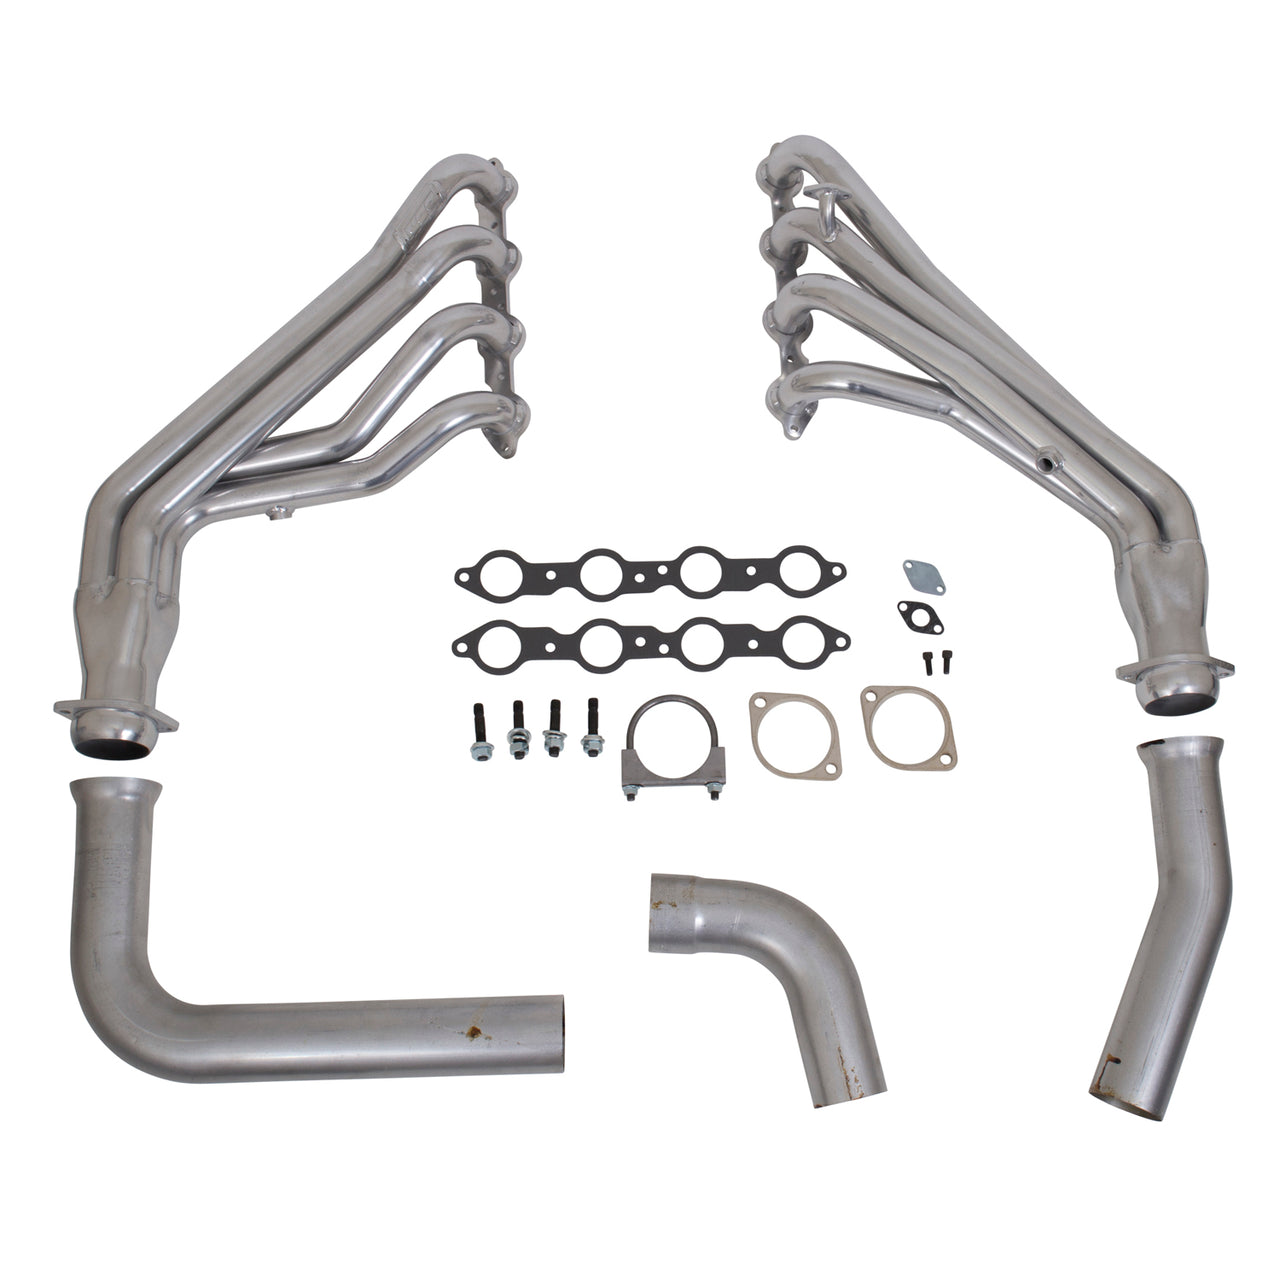 1999-2002 GM 4.8/5.3/6.0 FULL SIZE TRUCK LONG TUBE EXHAUST HEADERS & Y PIPE (POLISHED SILVER CERAMIC)